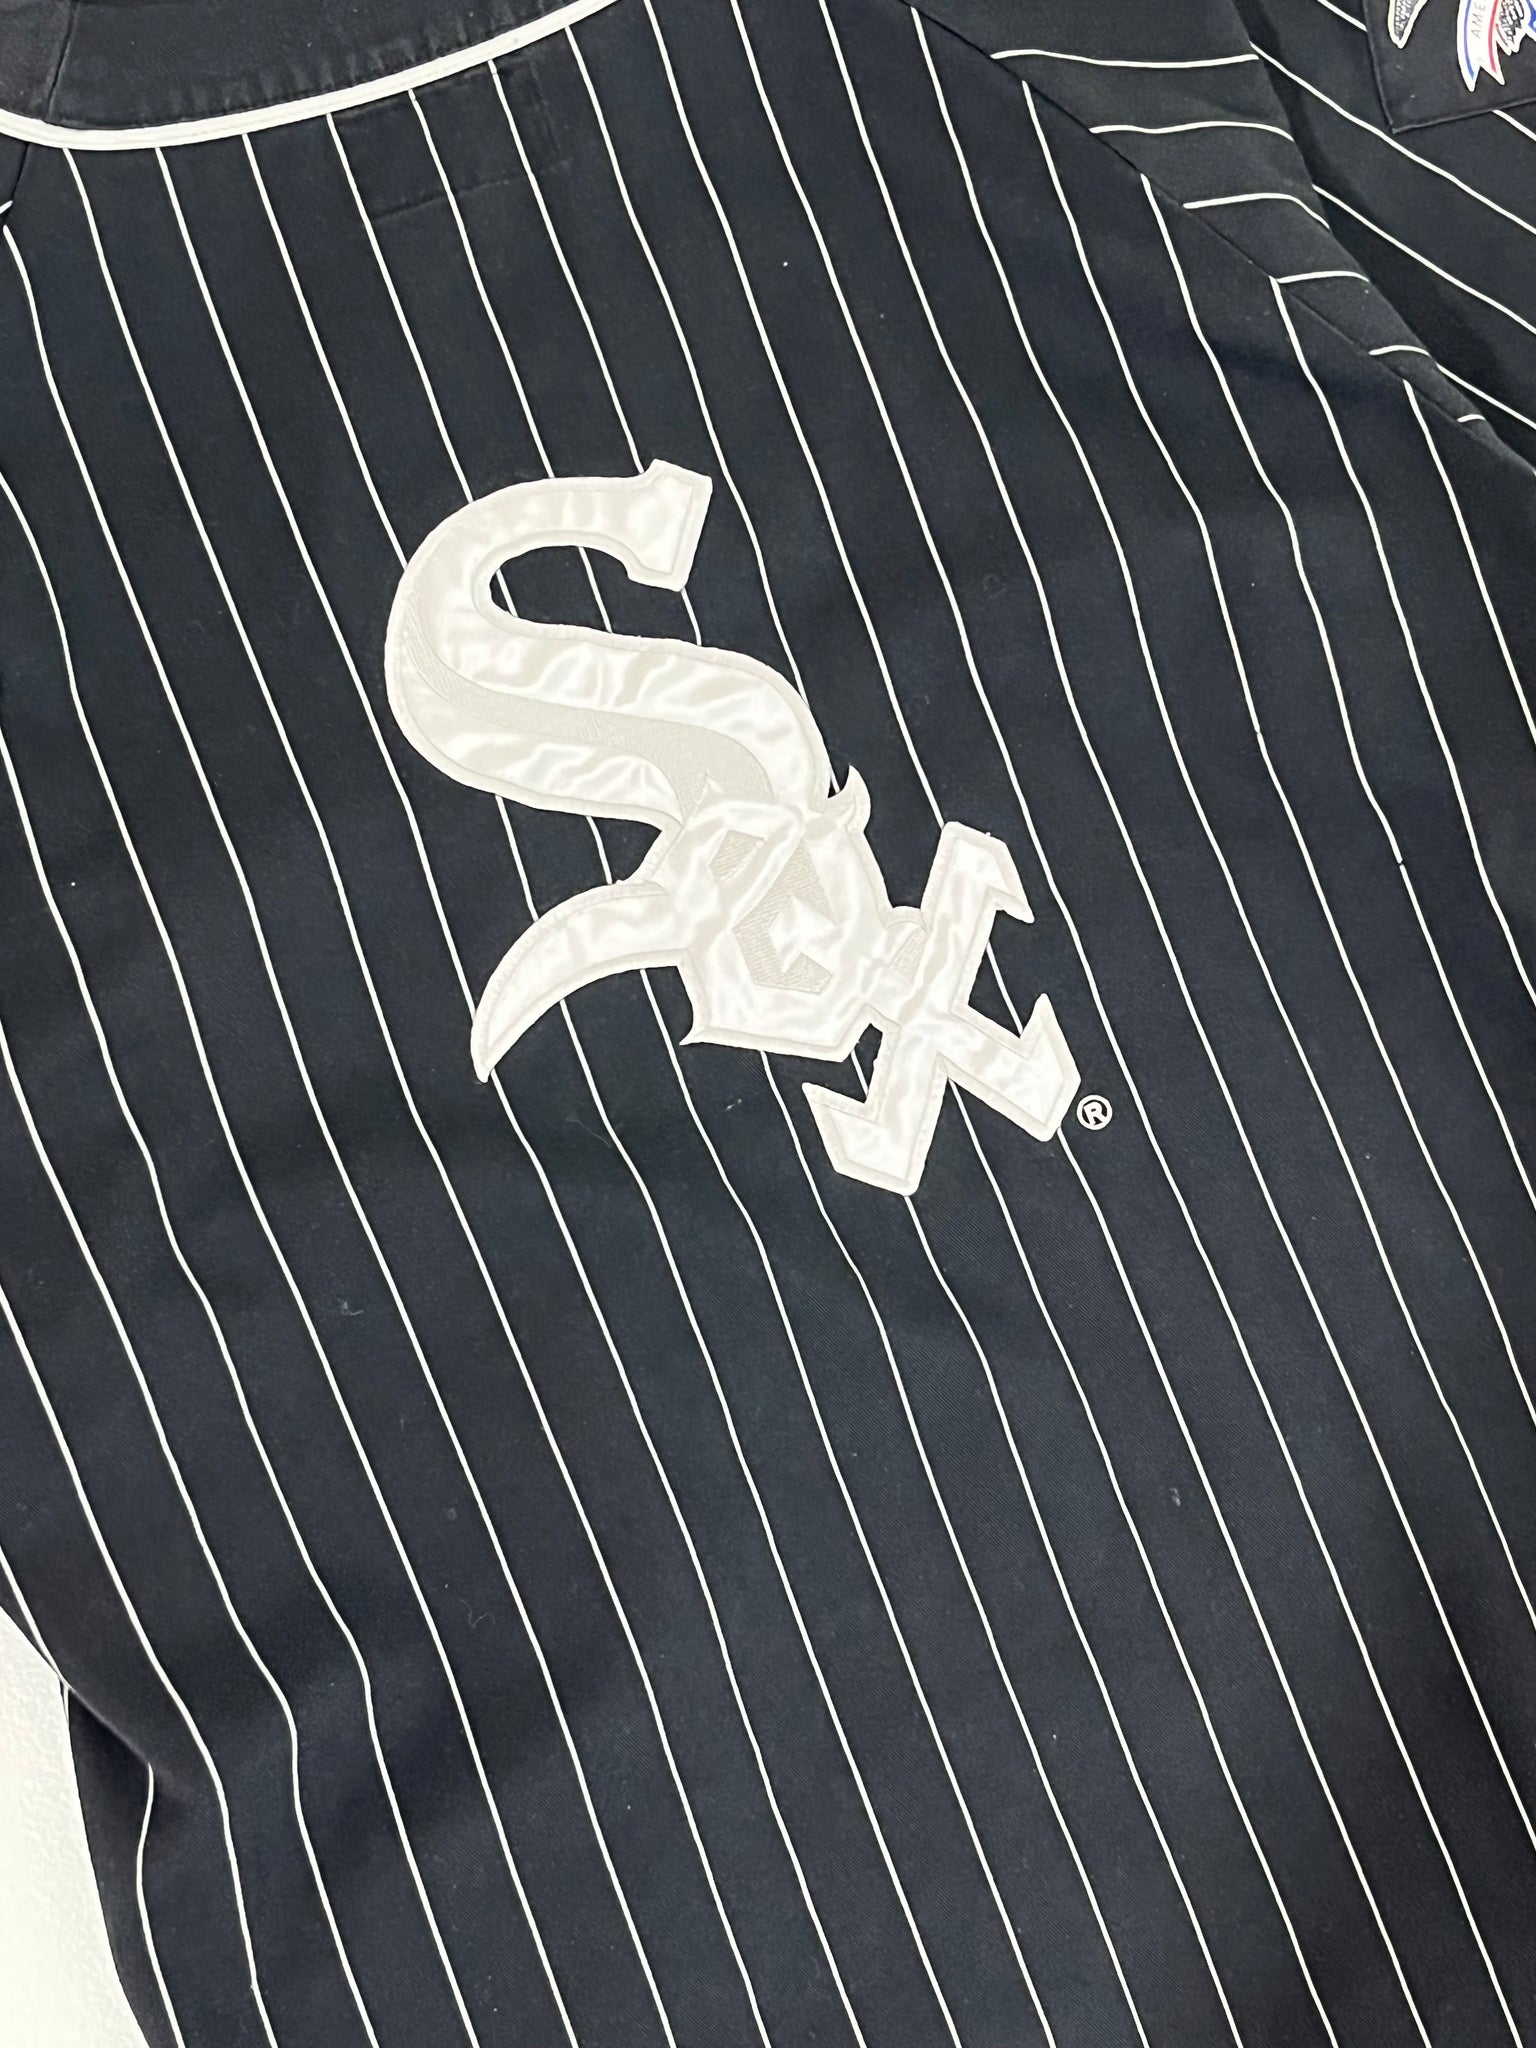 90’s Vintage Chicago White Sox MLB pinstripe jersey | SidelineSwap